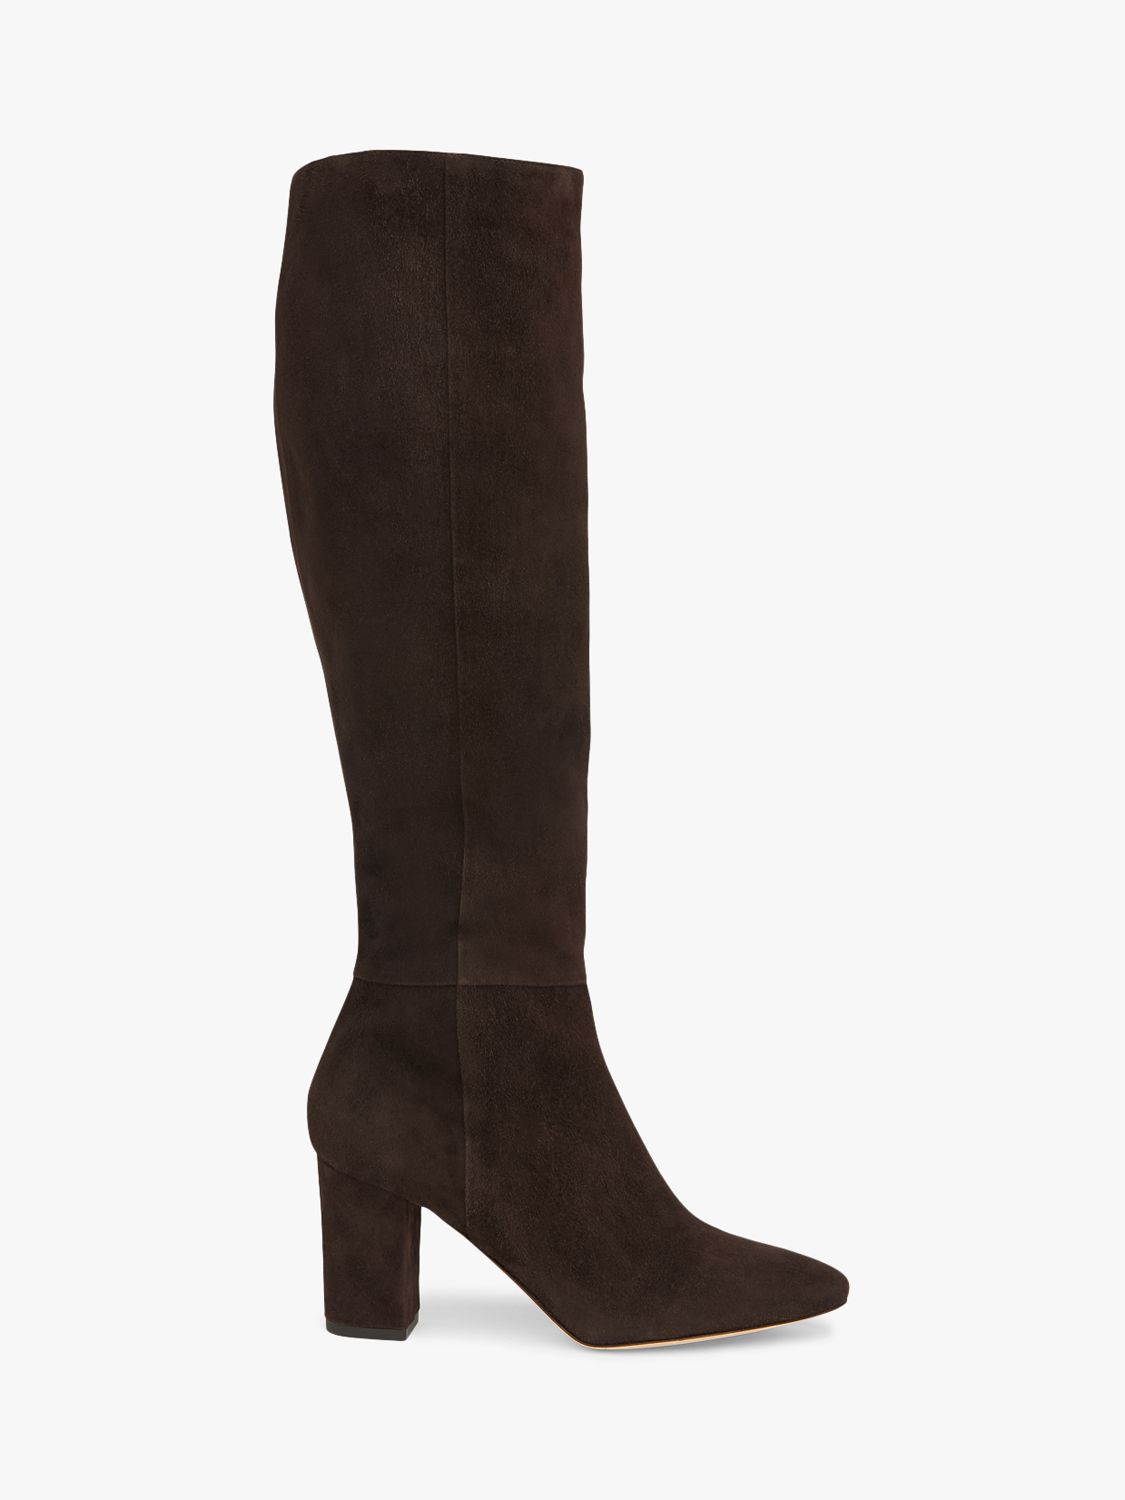 L.K.Bennett Sirena Suede Knee Boots, Chocolate at John Lewis & Partners